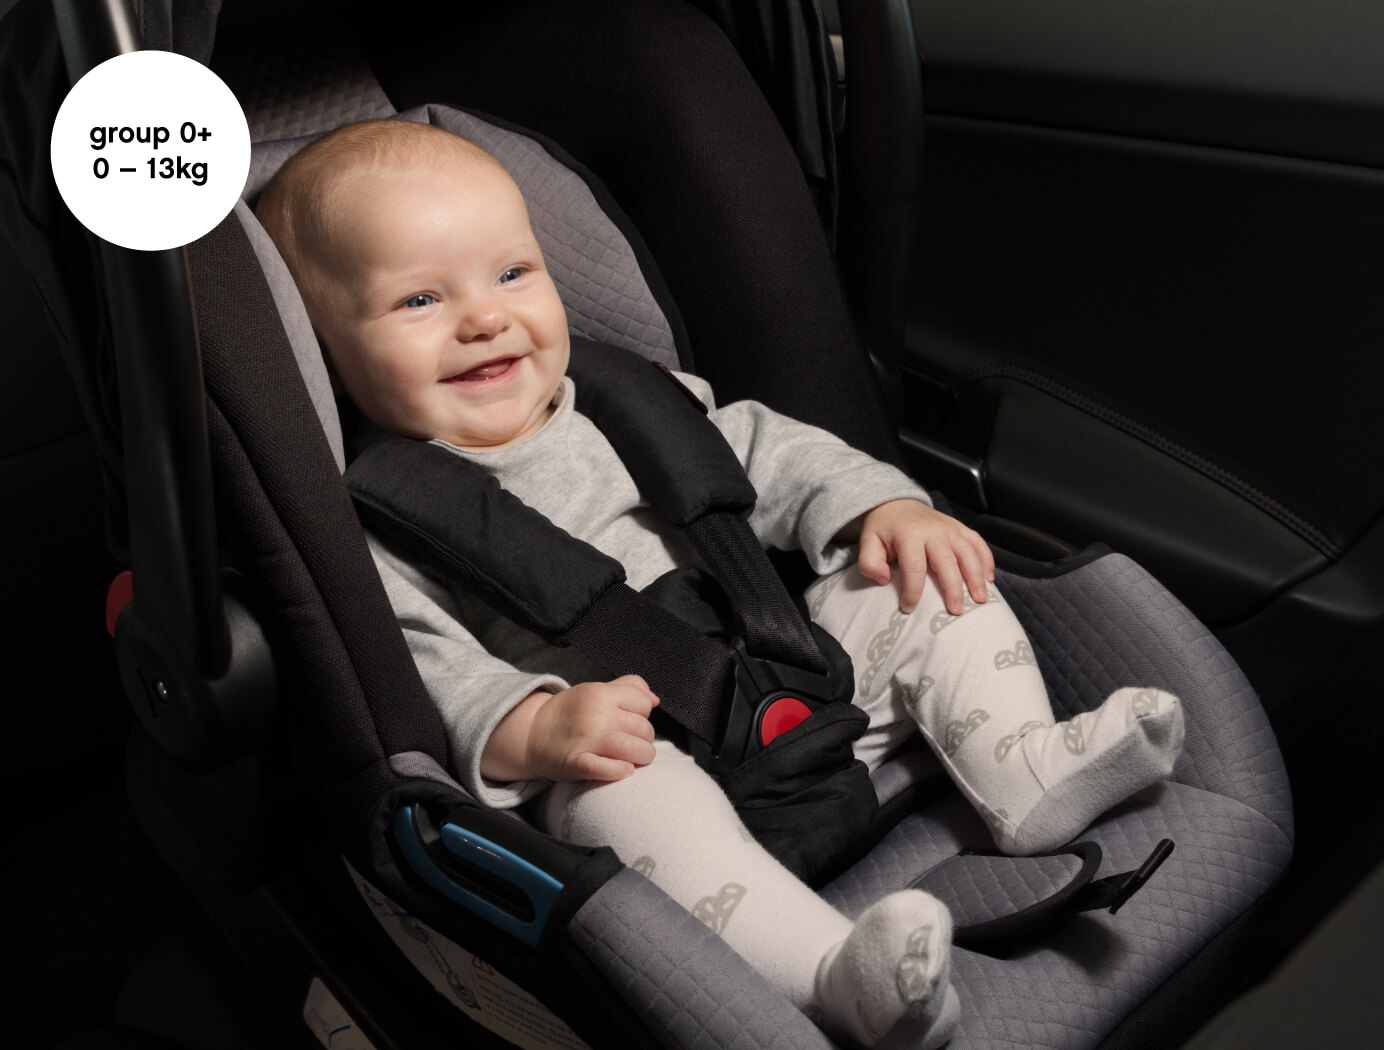 Protect Infant Car Seat Seats, Where Can I Get A Free Car Seat For My Newborn In Taiwan